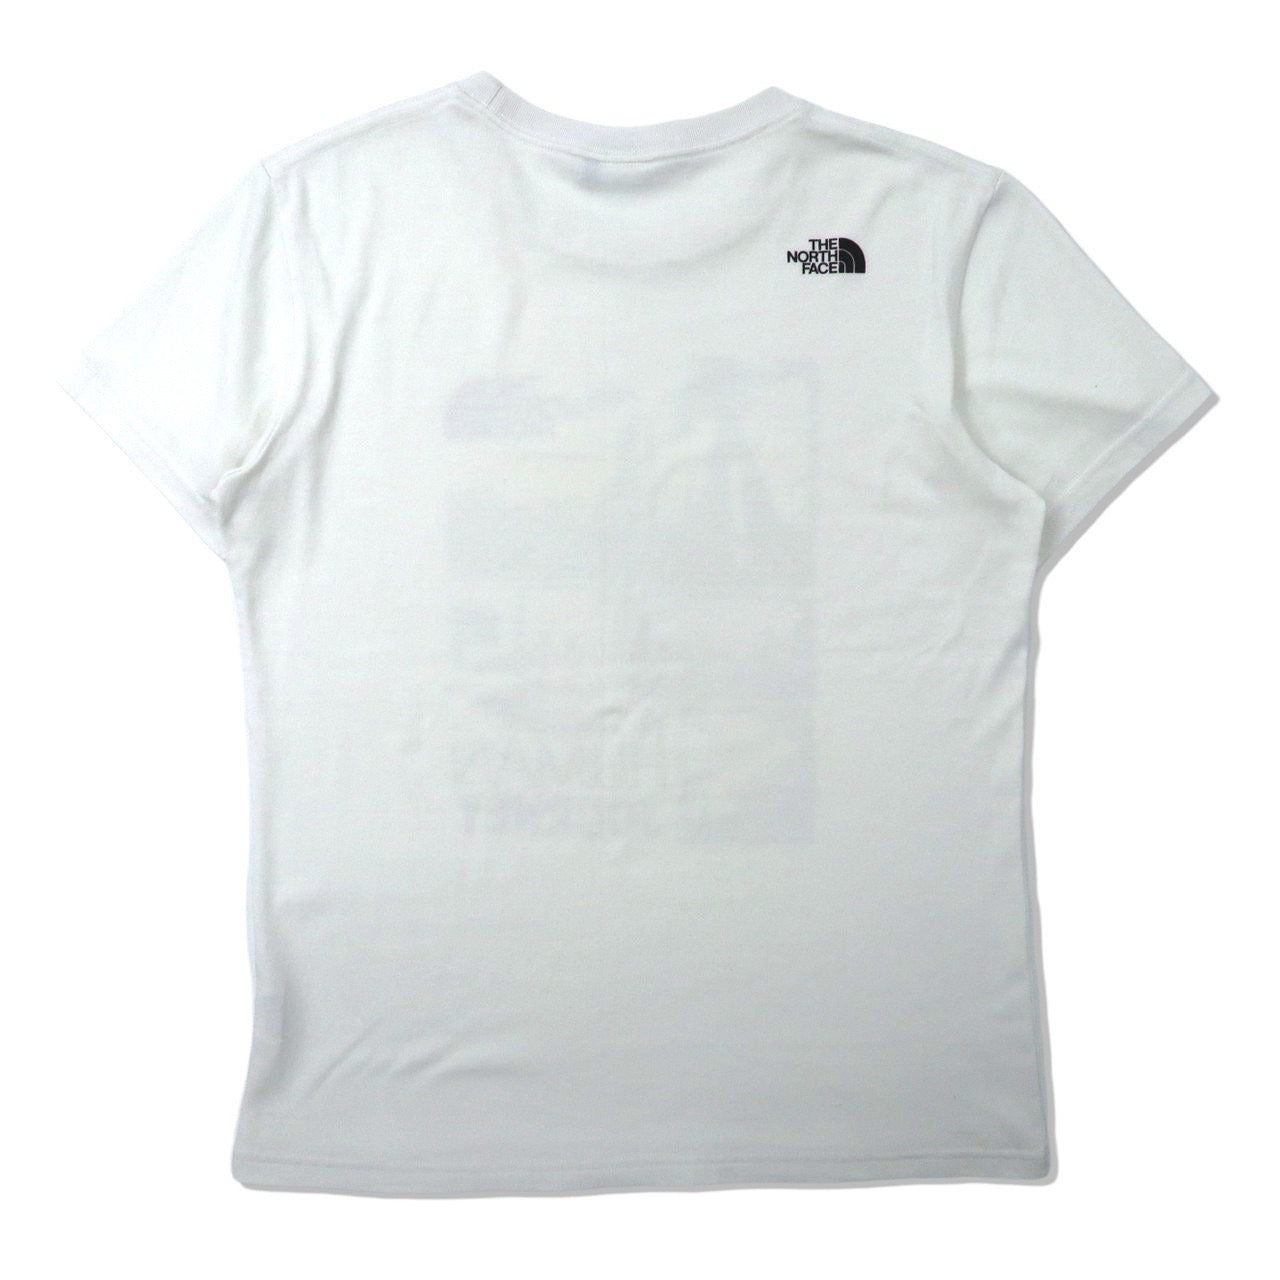 THE NORTH FACE プリントTシャツ L ホワイト コットン S/S Trip Photo Tee NT31321